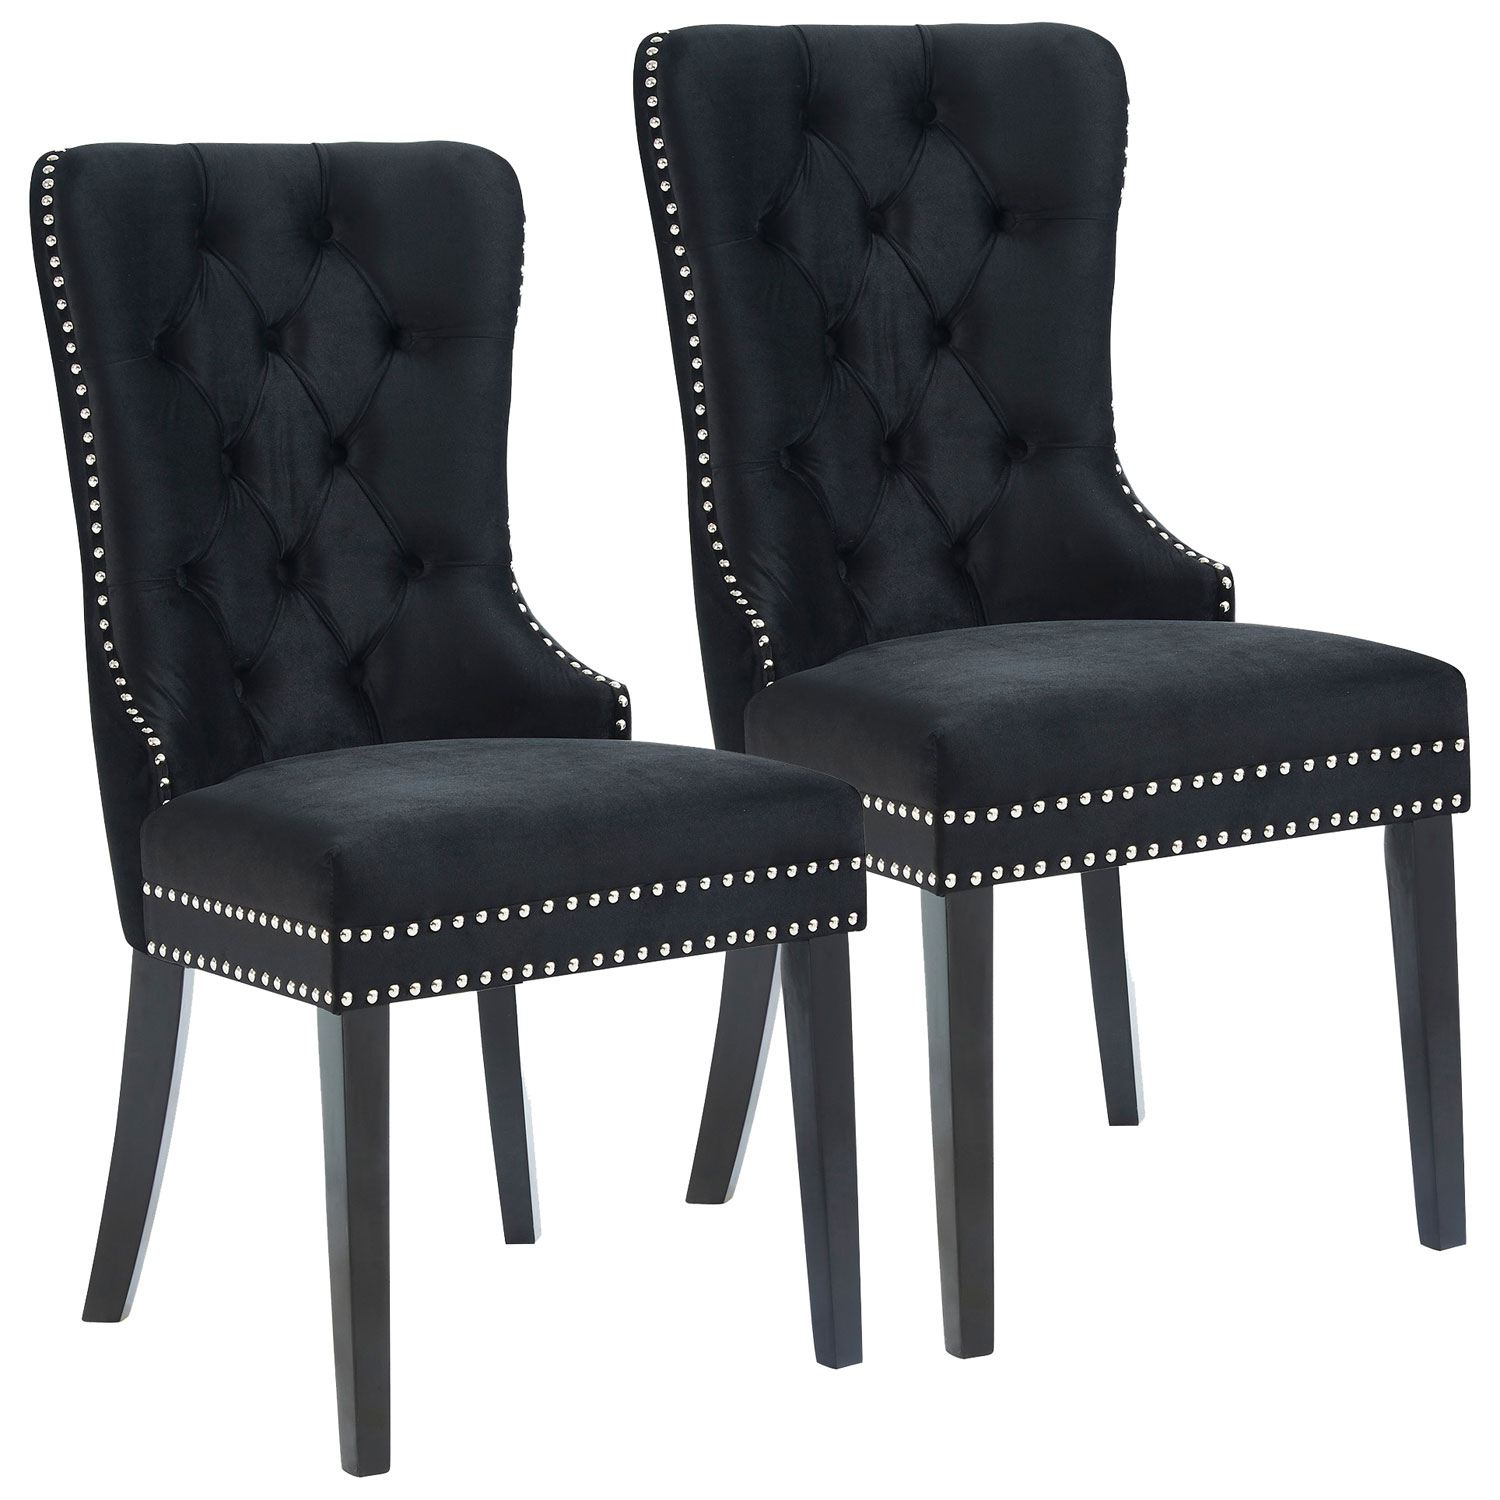 Rizzo Modern Fabric Dining Chair - Set of 2 - Black